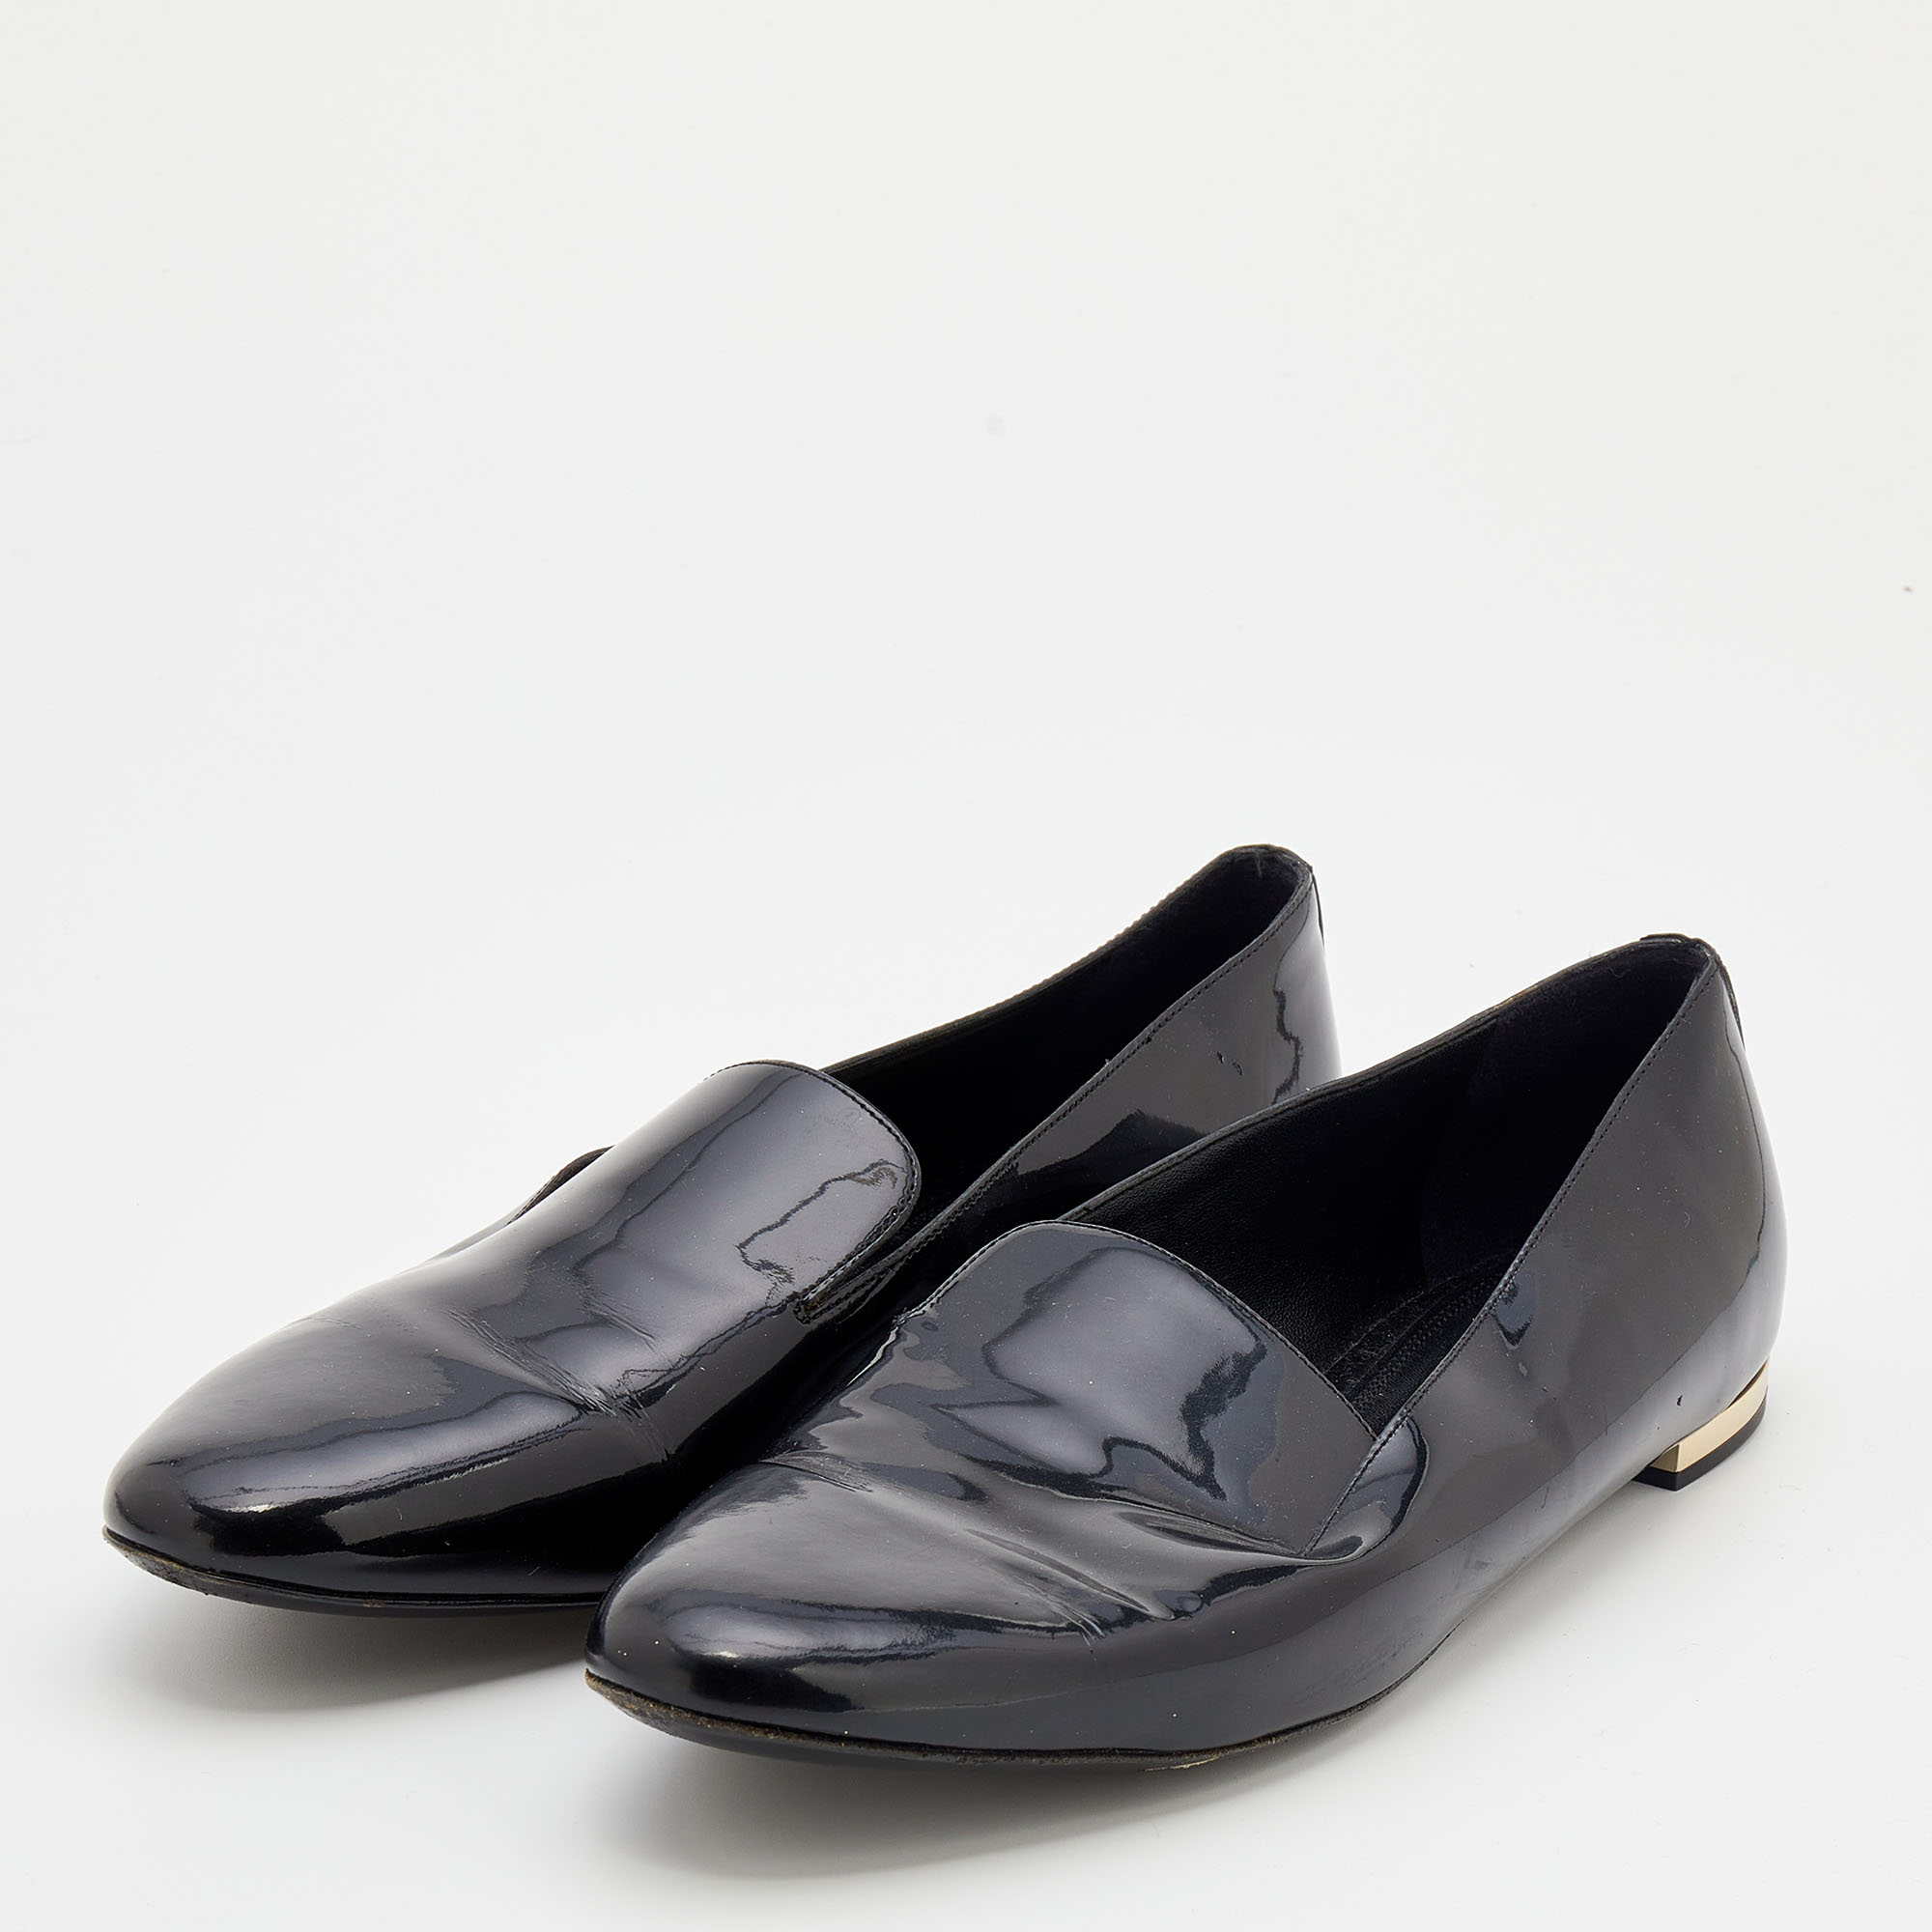 

Burberry Black Patent Leather Slip on Loafers Size